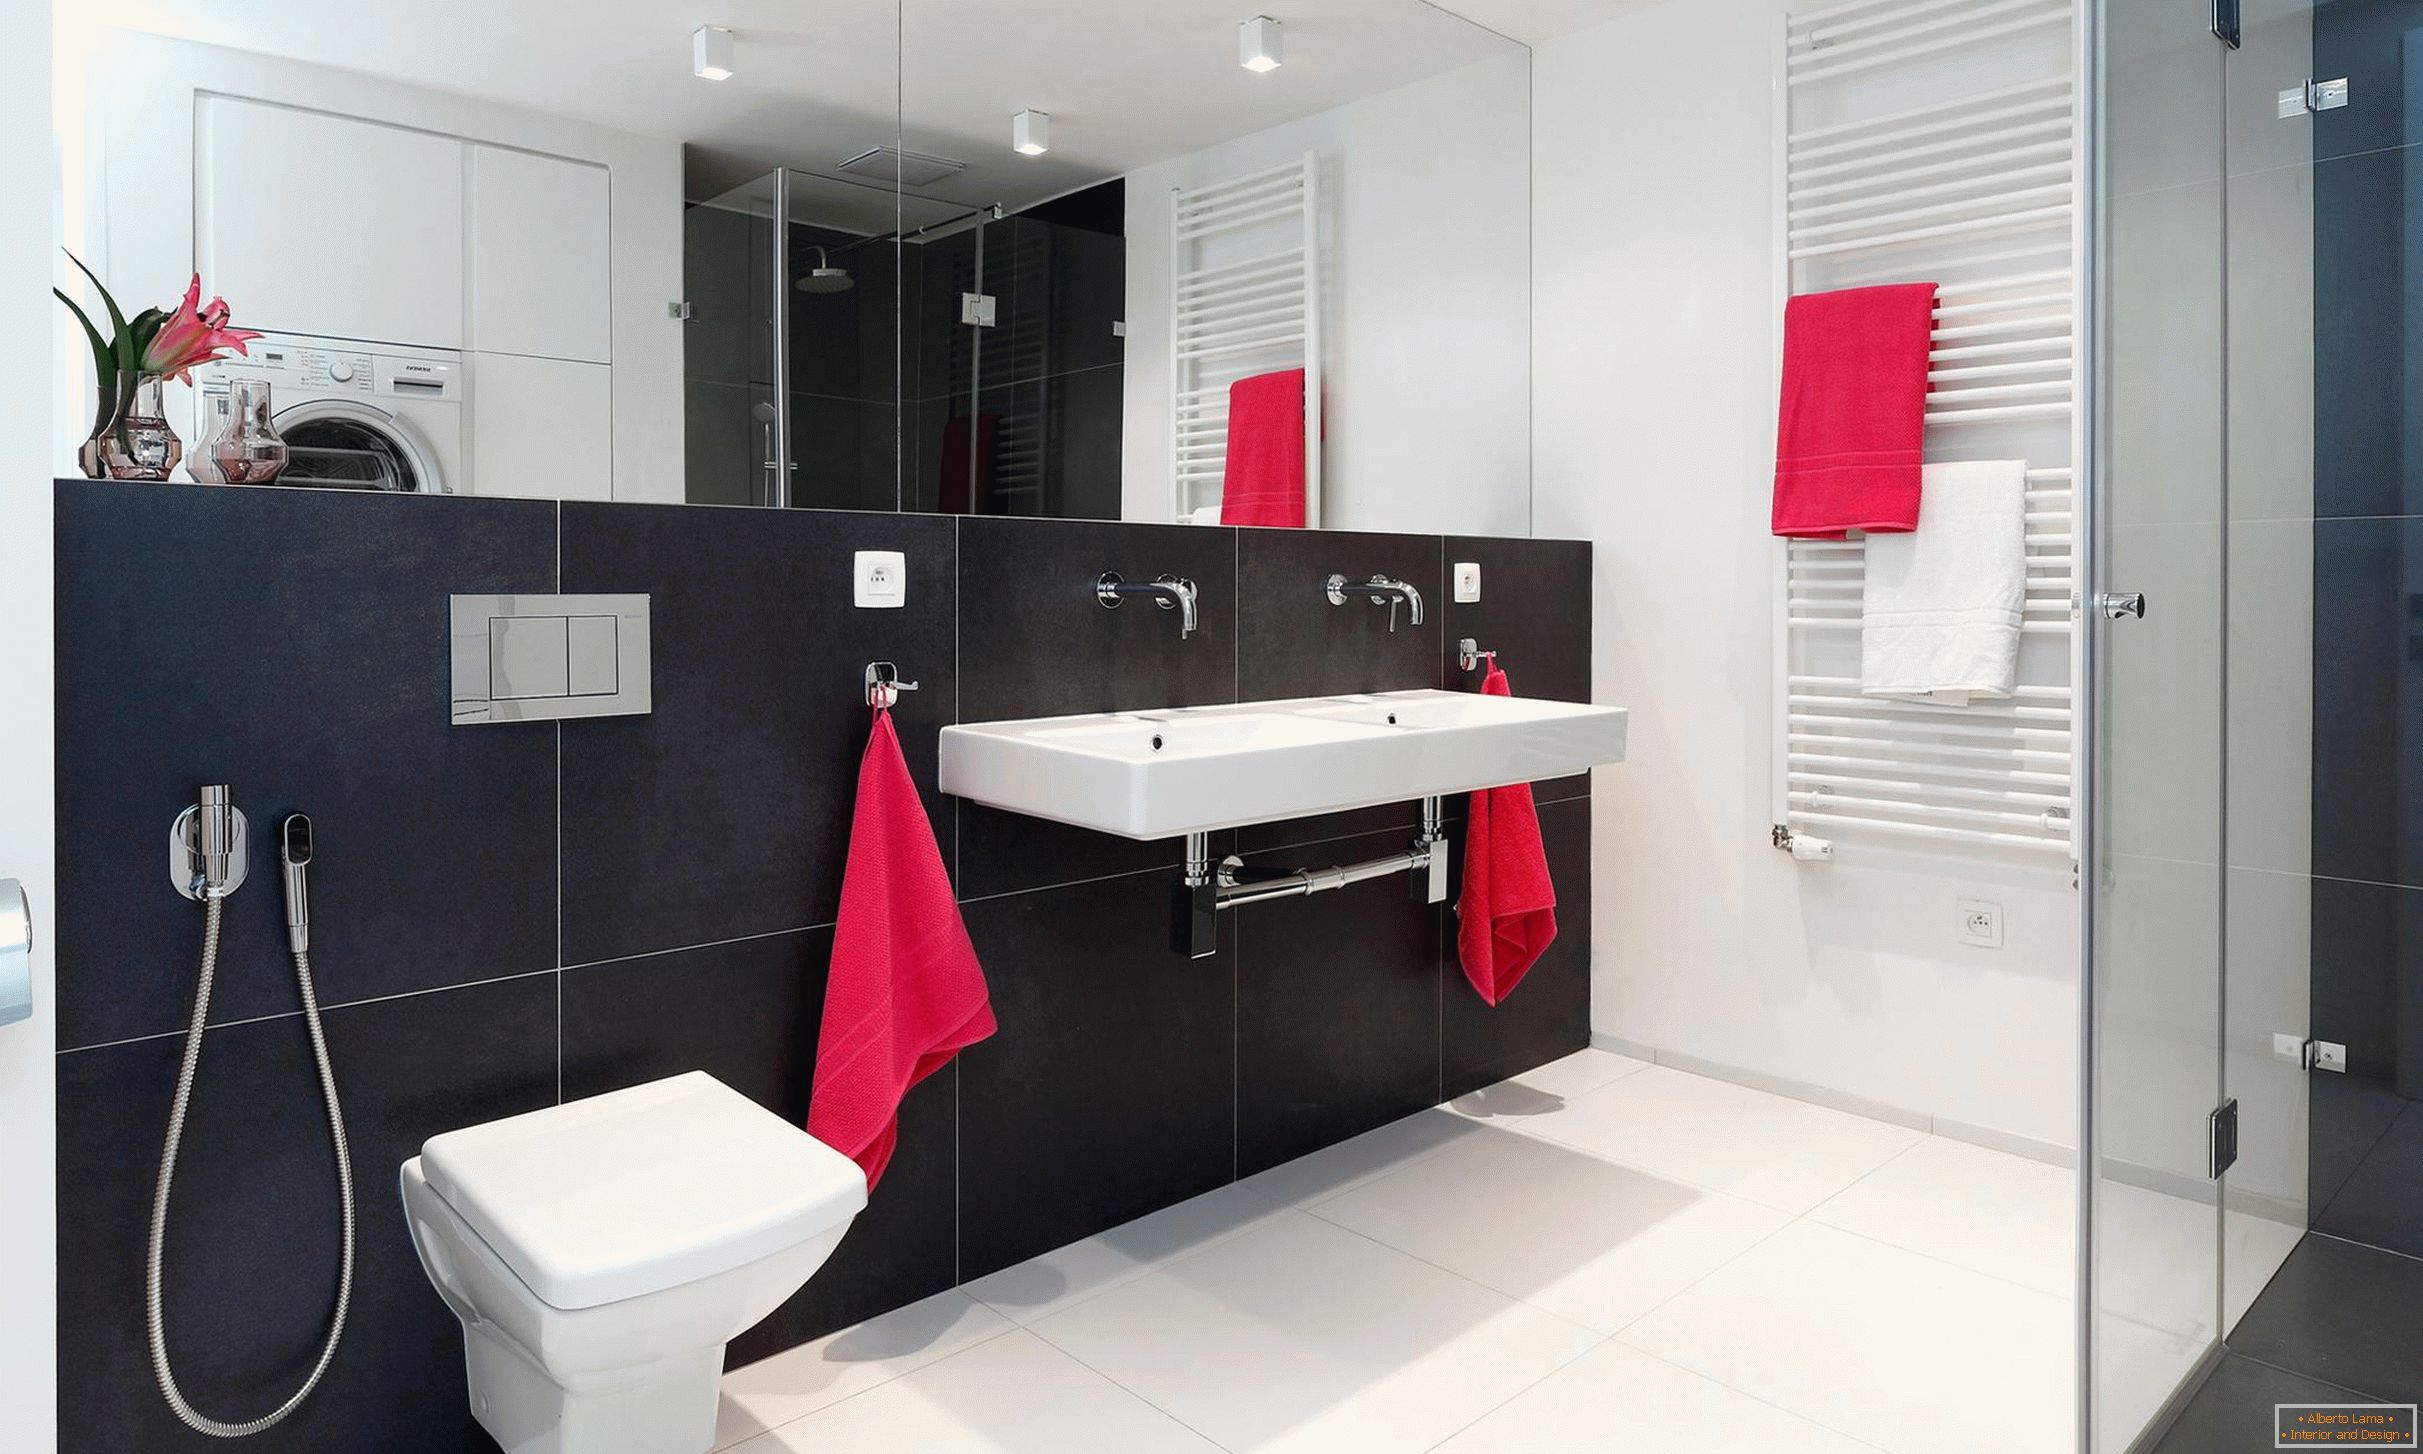 Red, white and black in the design of the bathroom